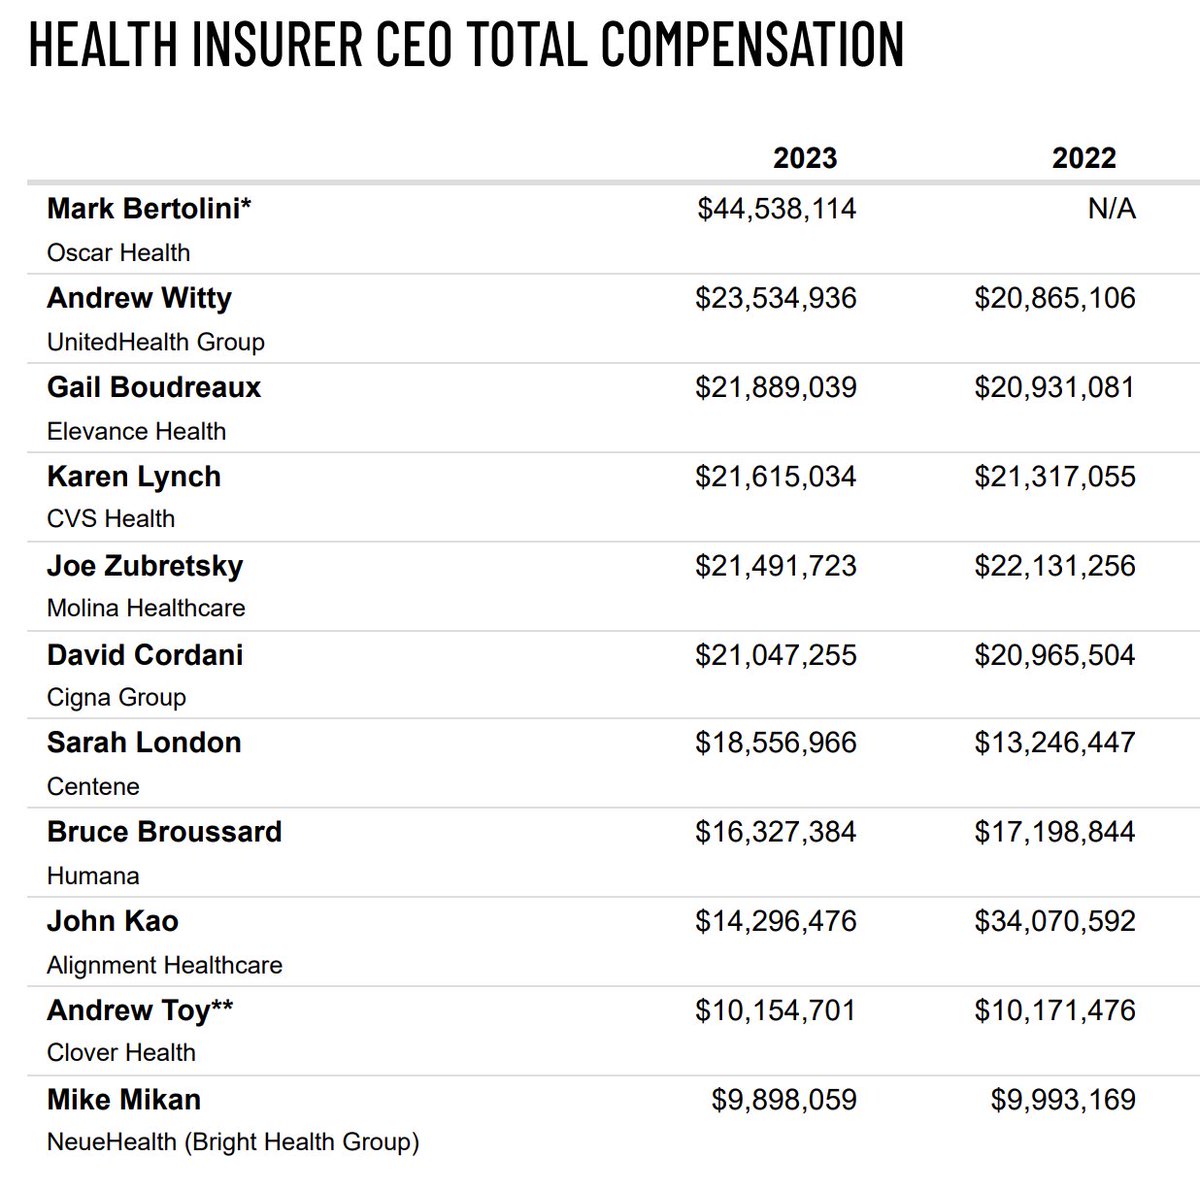 While you worry about the bill for your next doctor's visit, health insurance CEOs are buying their third vacation home. It’s time to join the rest of the developed world. It's time for Medicare for All!